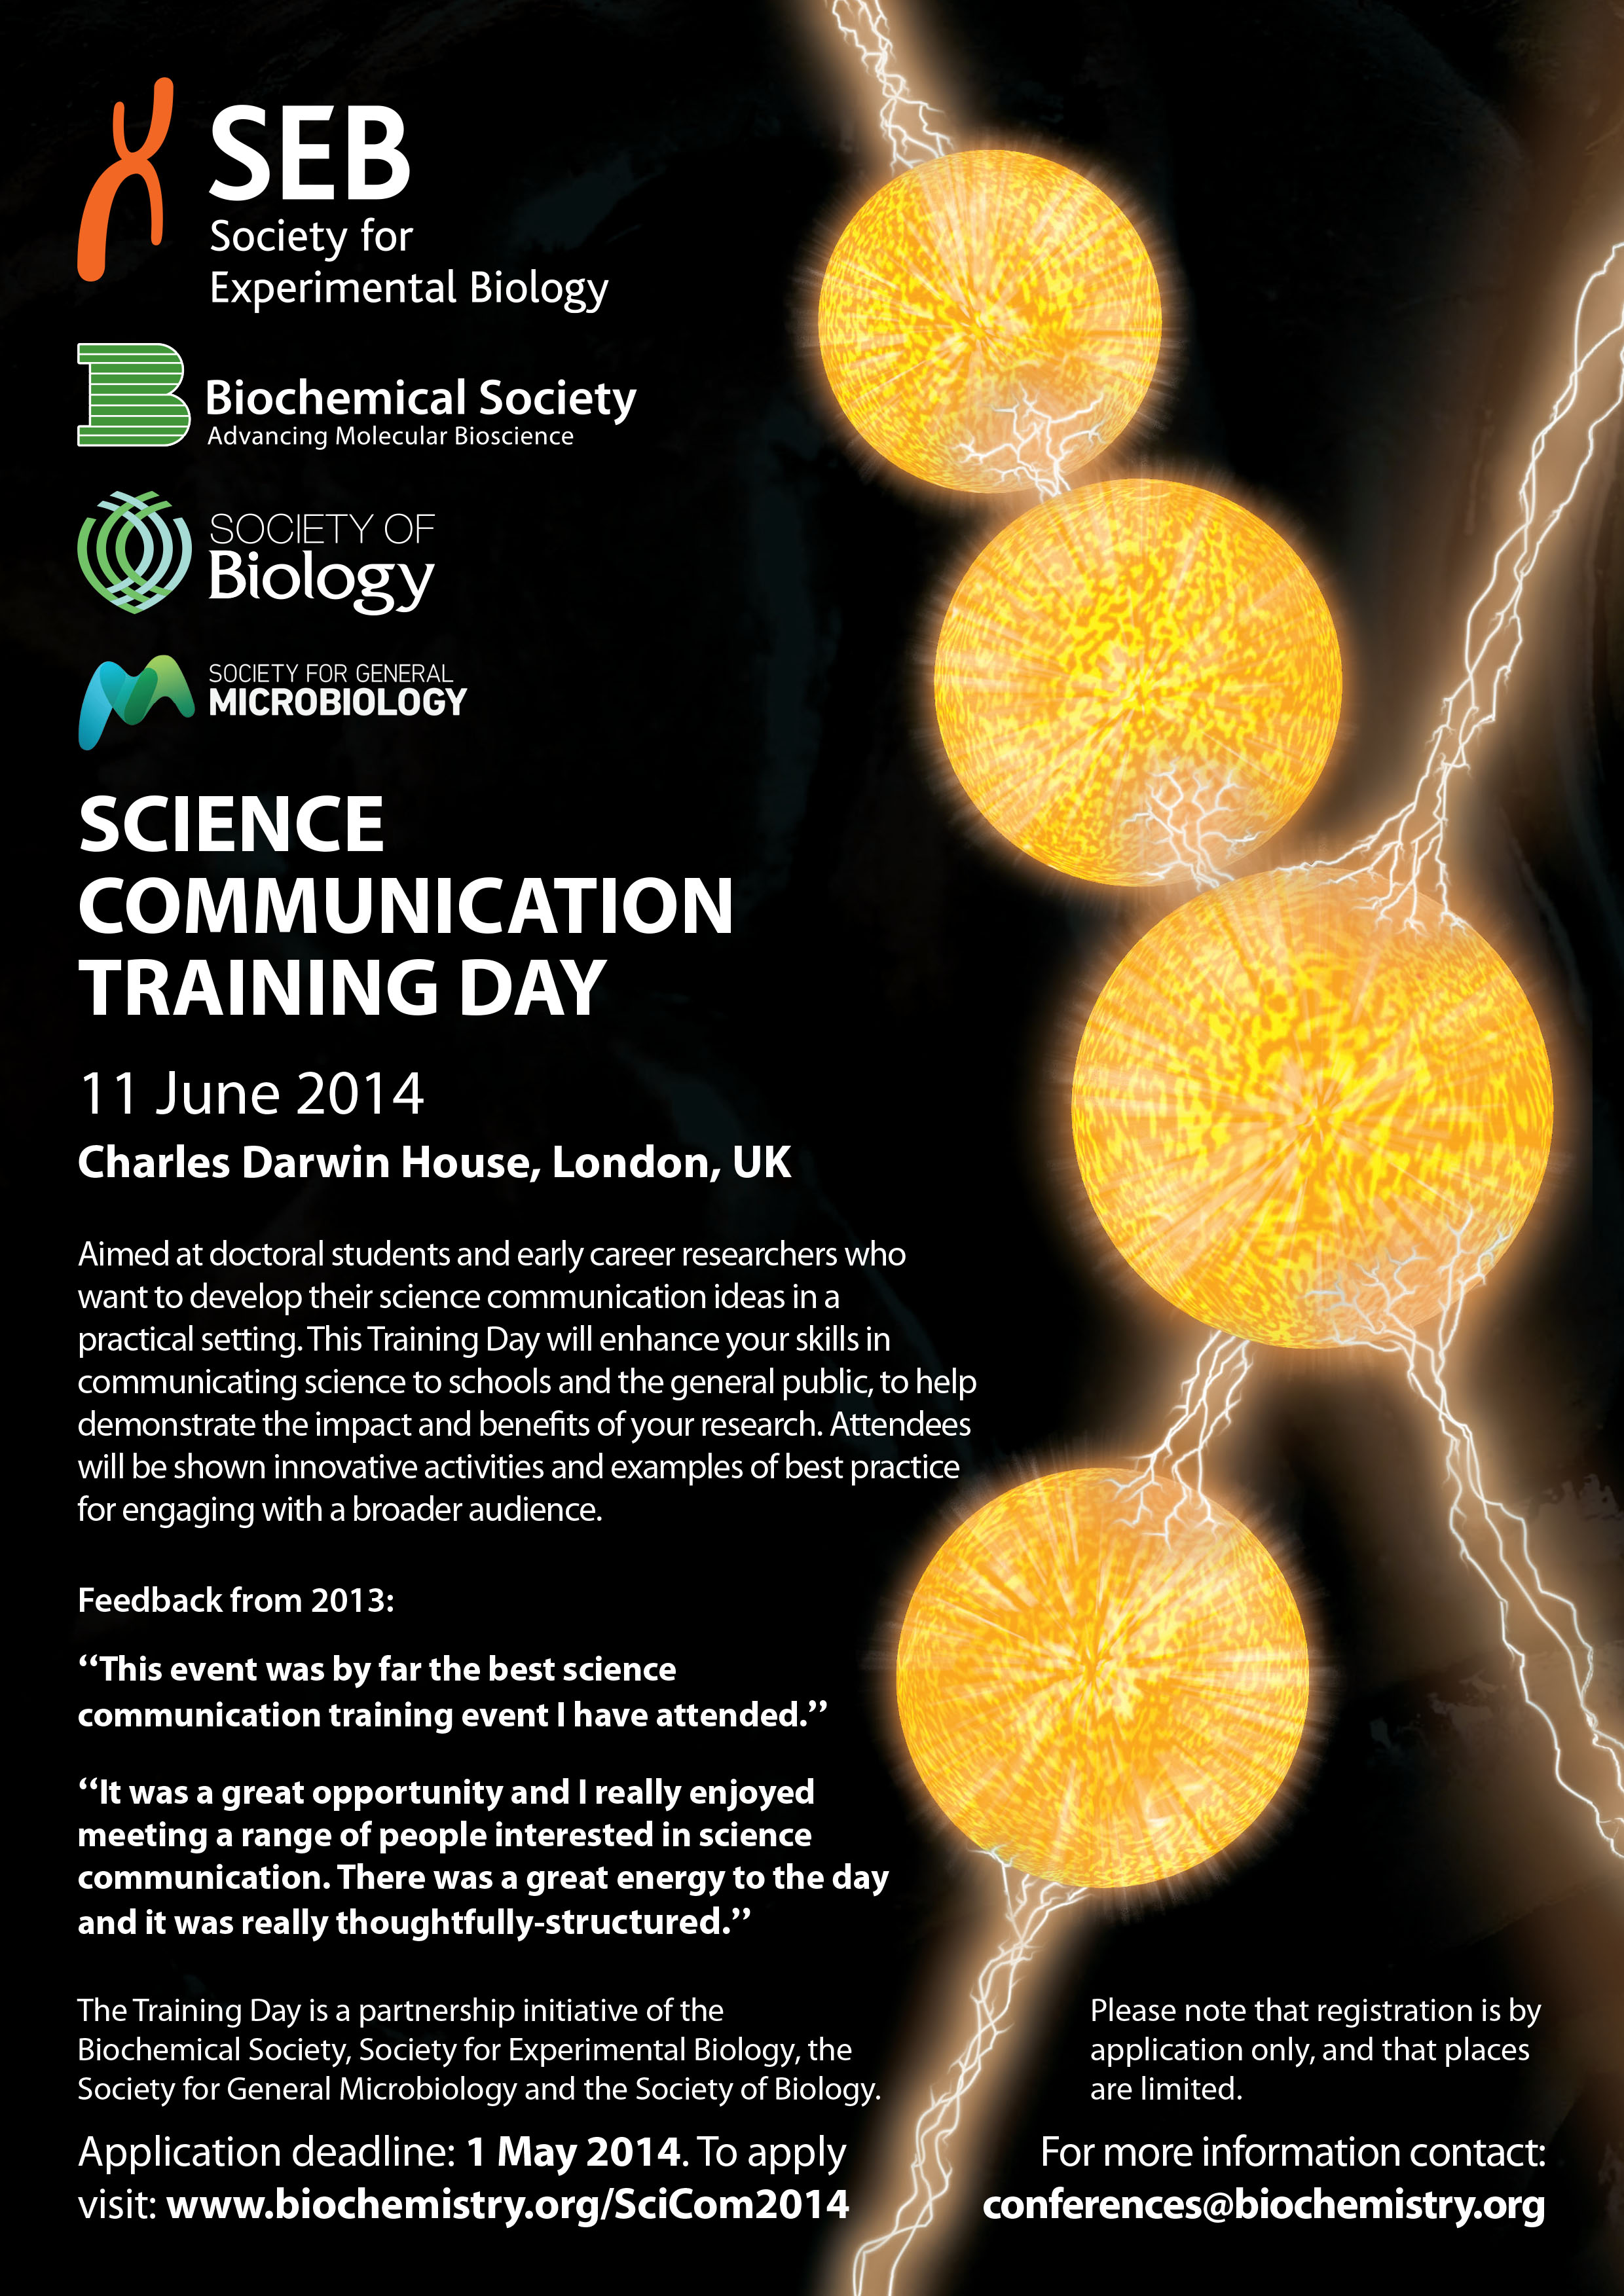 20140012 Science Communication Training Day_Flyer_PROOF (2)